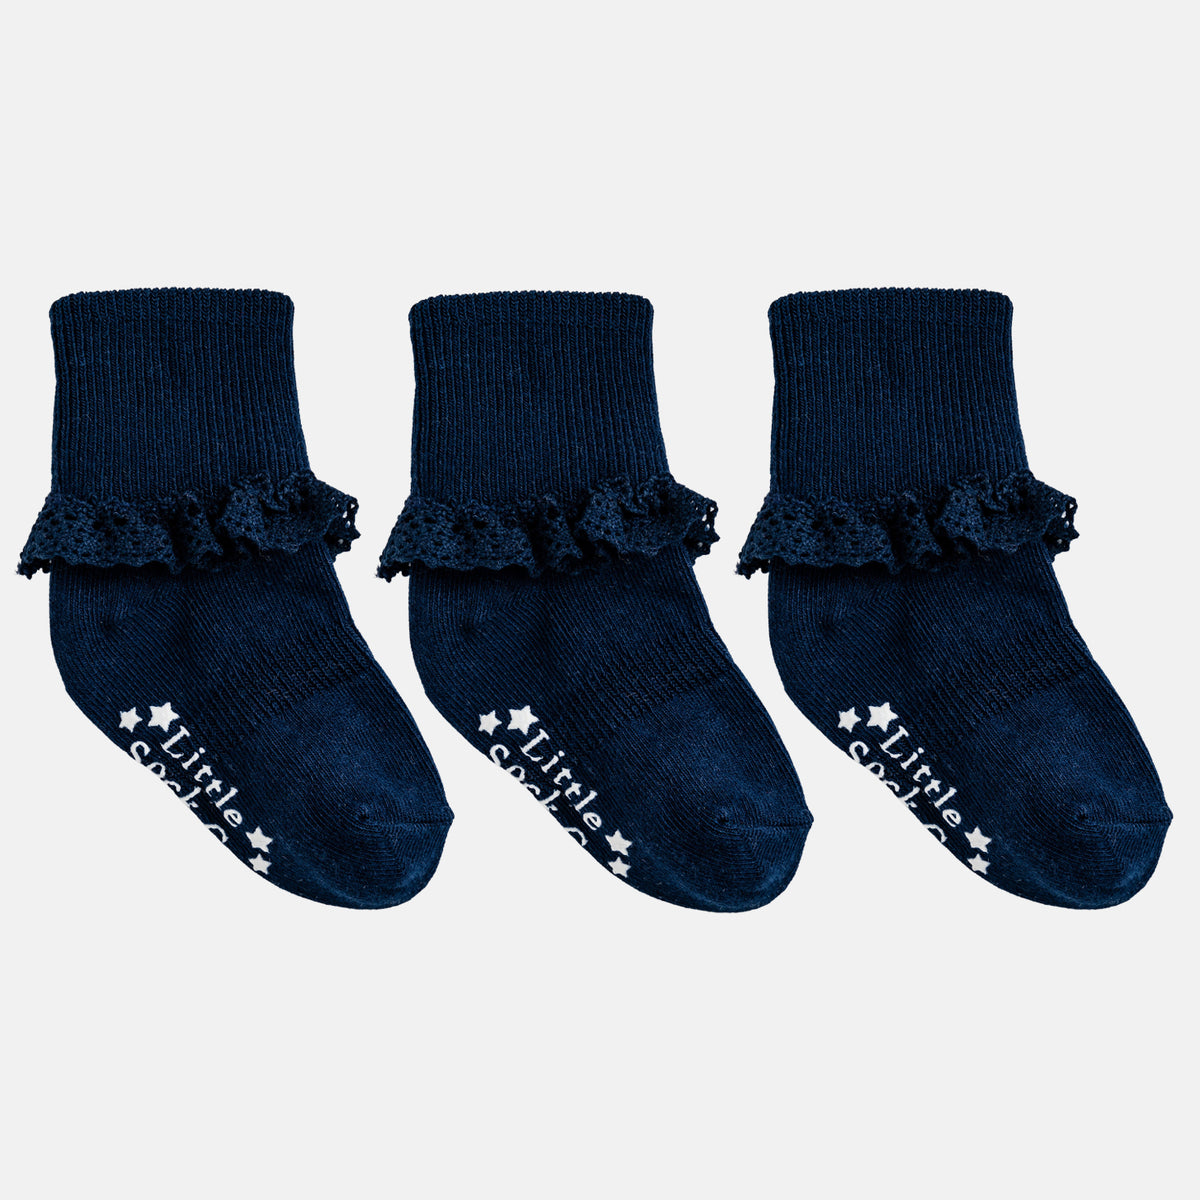 Frilly Non-Slip Stay-On Baby and Toddler Socks - 3 Pack in Plain Navy